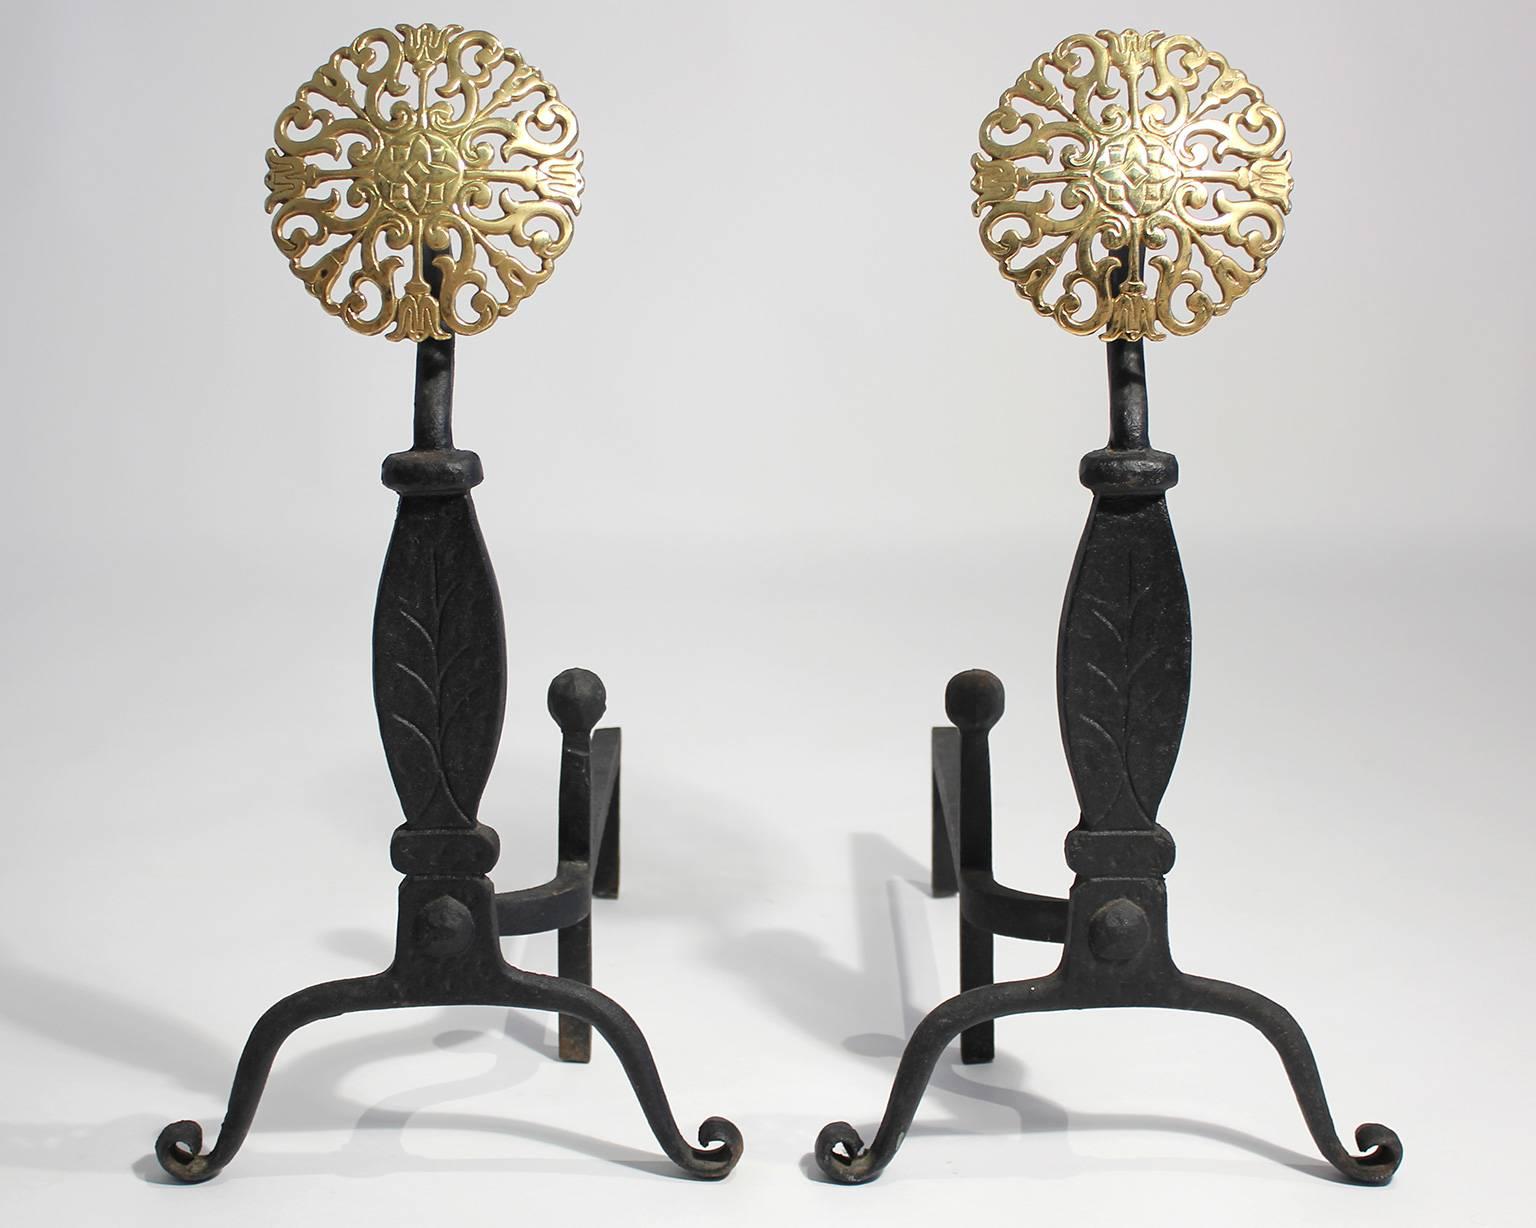 Pair of Virginia metal crafters decorative iron and brass medallion andirons. Excellent original condition.